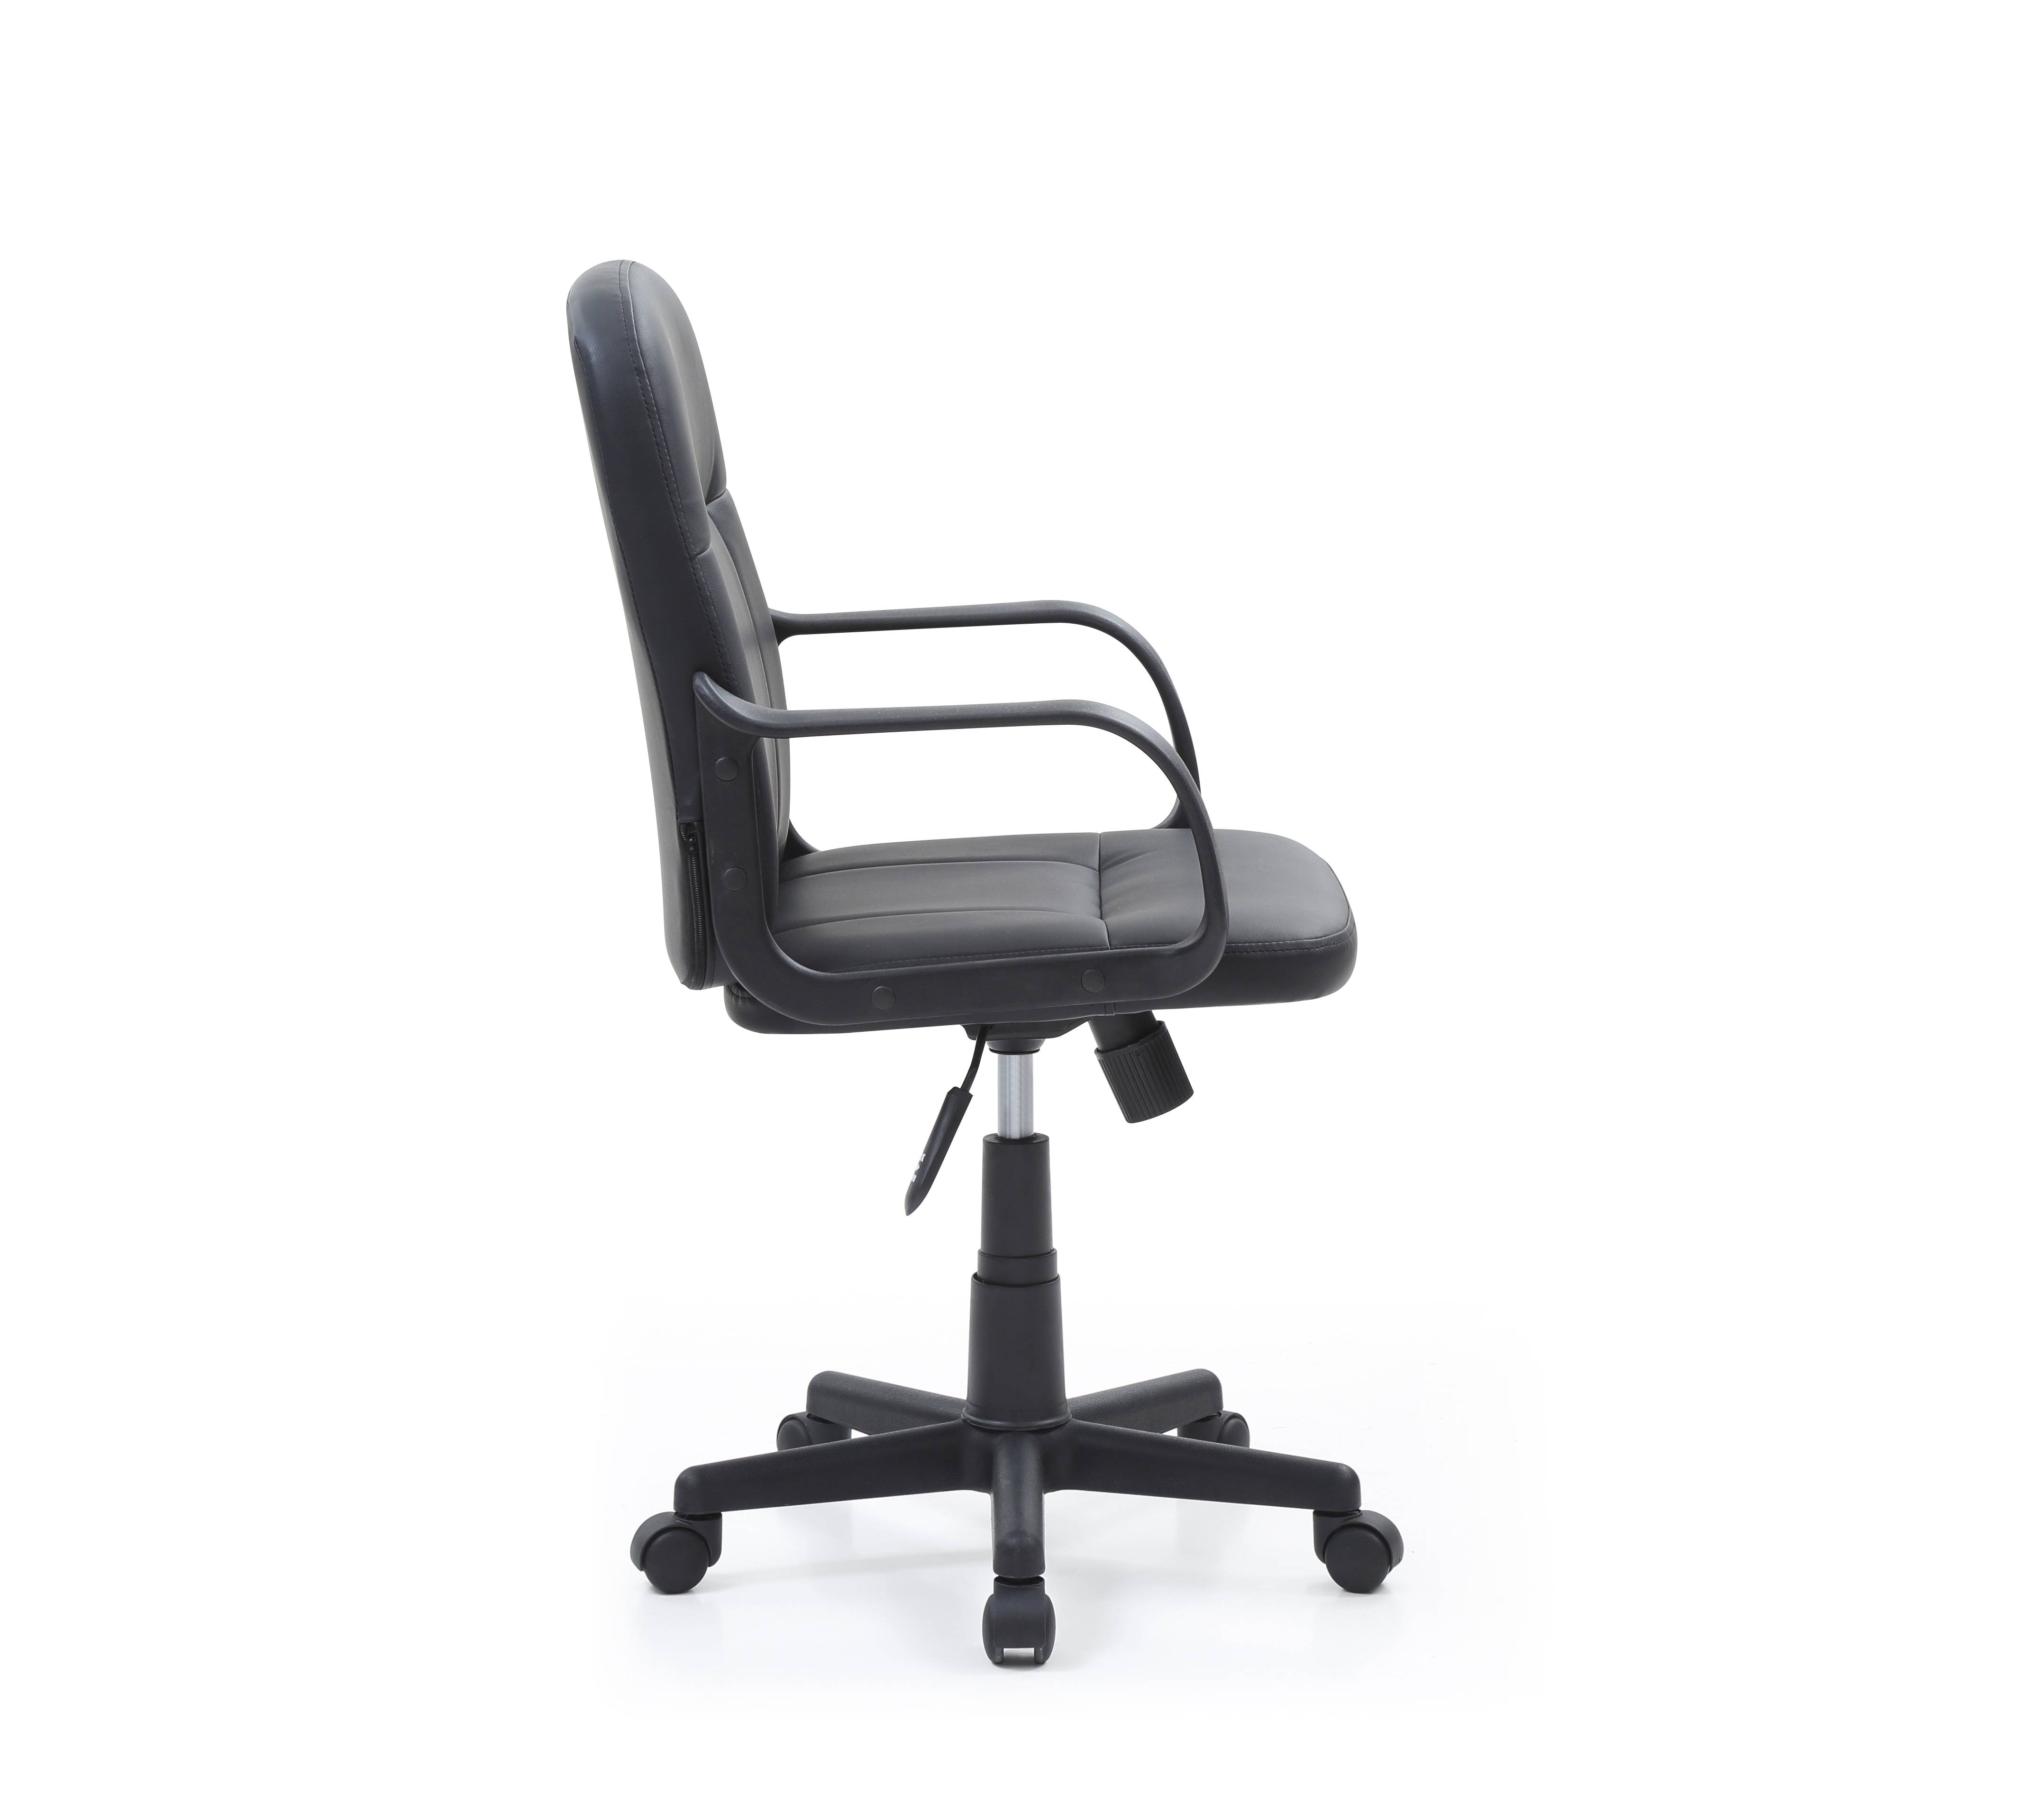 Hodedah 19.5 in Manager's Chair with Adjustable Height & Swivel, 200 lb. Capacity, Black - image 3 of 5